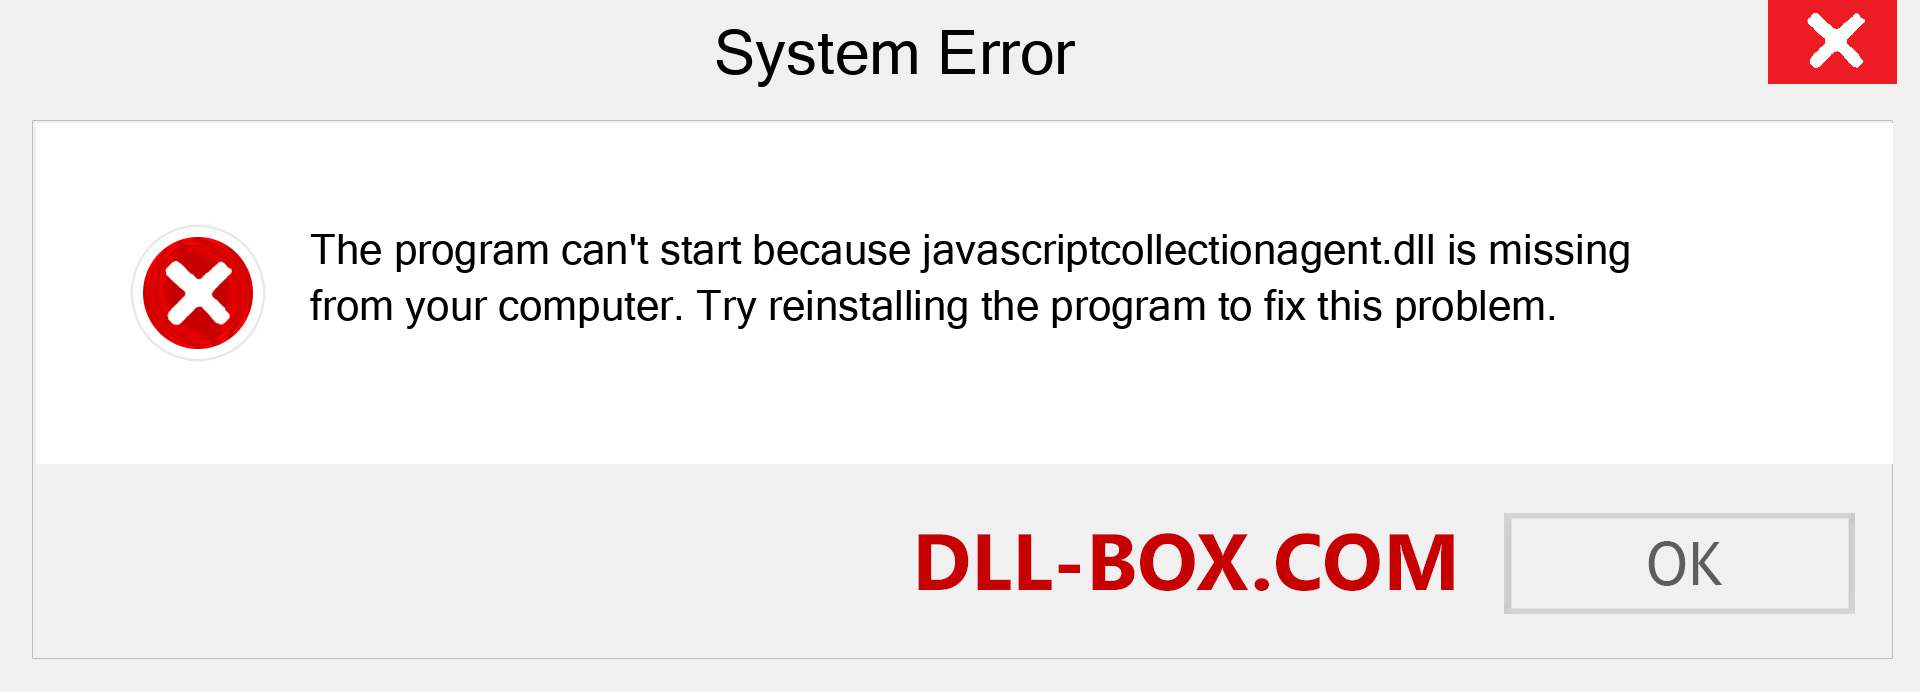  javascriptcollectionagent.dll file is missing?. Download for Windows 7, 8, 10 - Fix  javascriptcollectionagent dll Missing Error on Windows, photos, images